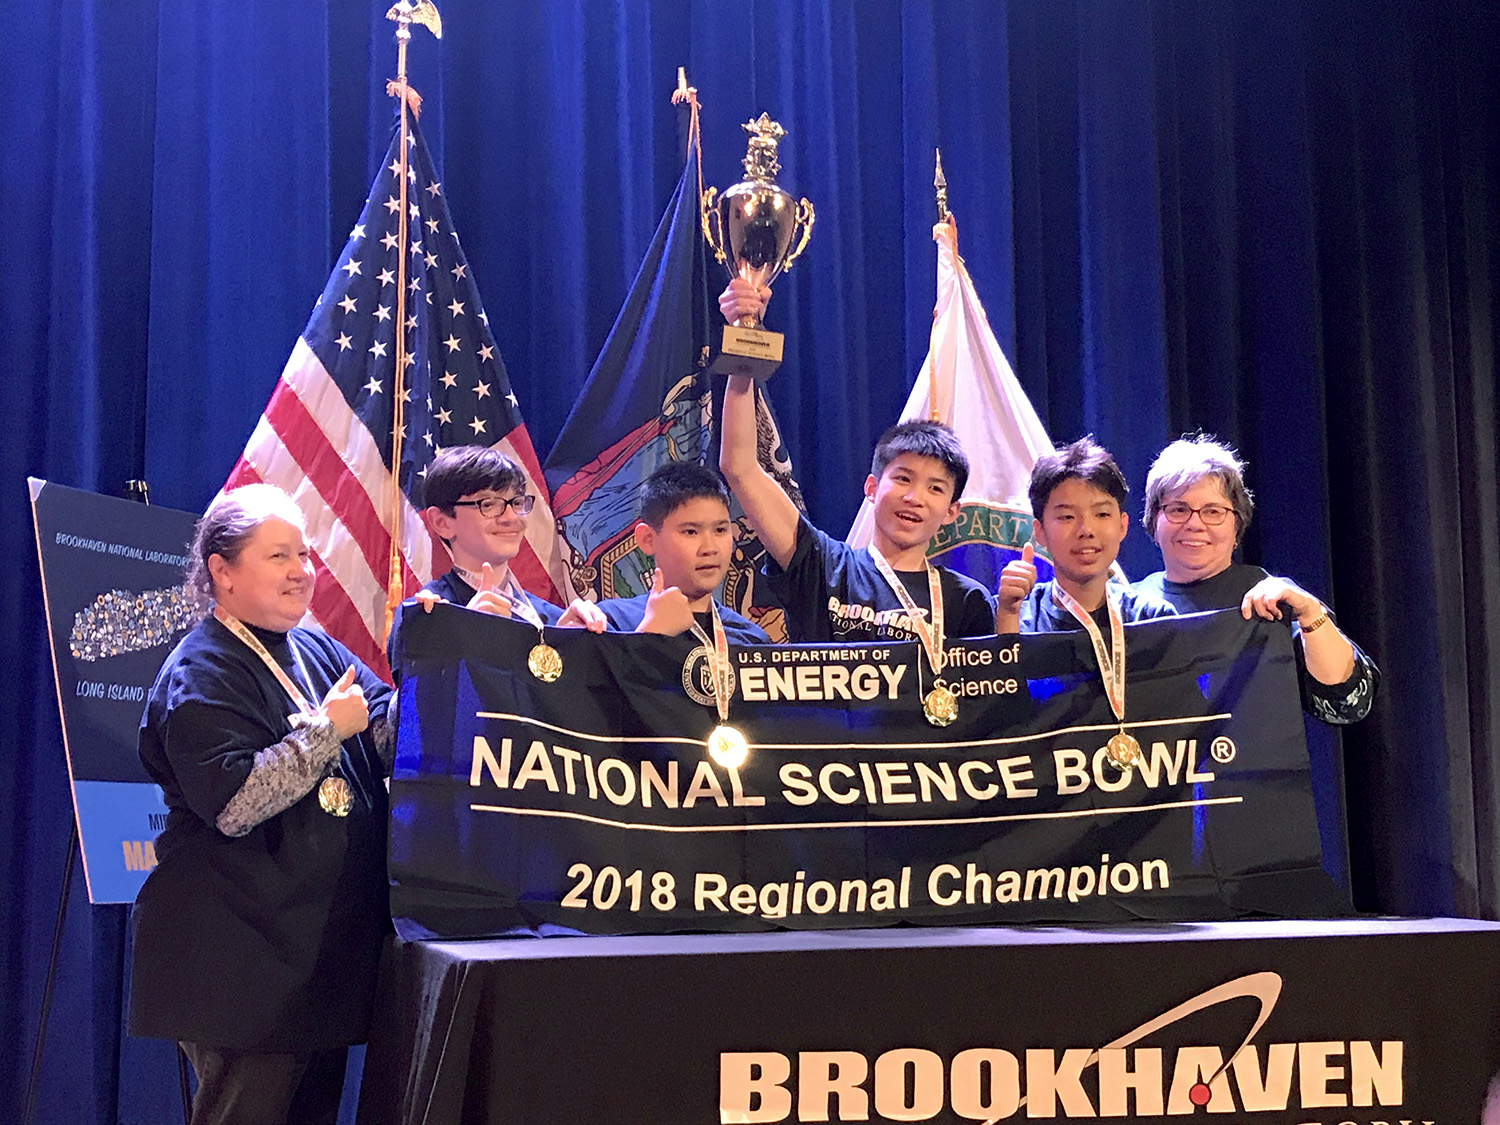 The South Middle team holds their Regional Science Bowl banner and trophy. (Photo courtesy of the Great Neck Public Schools)